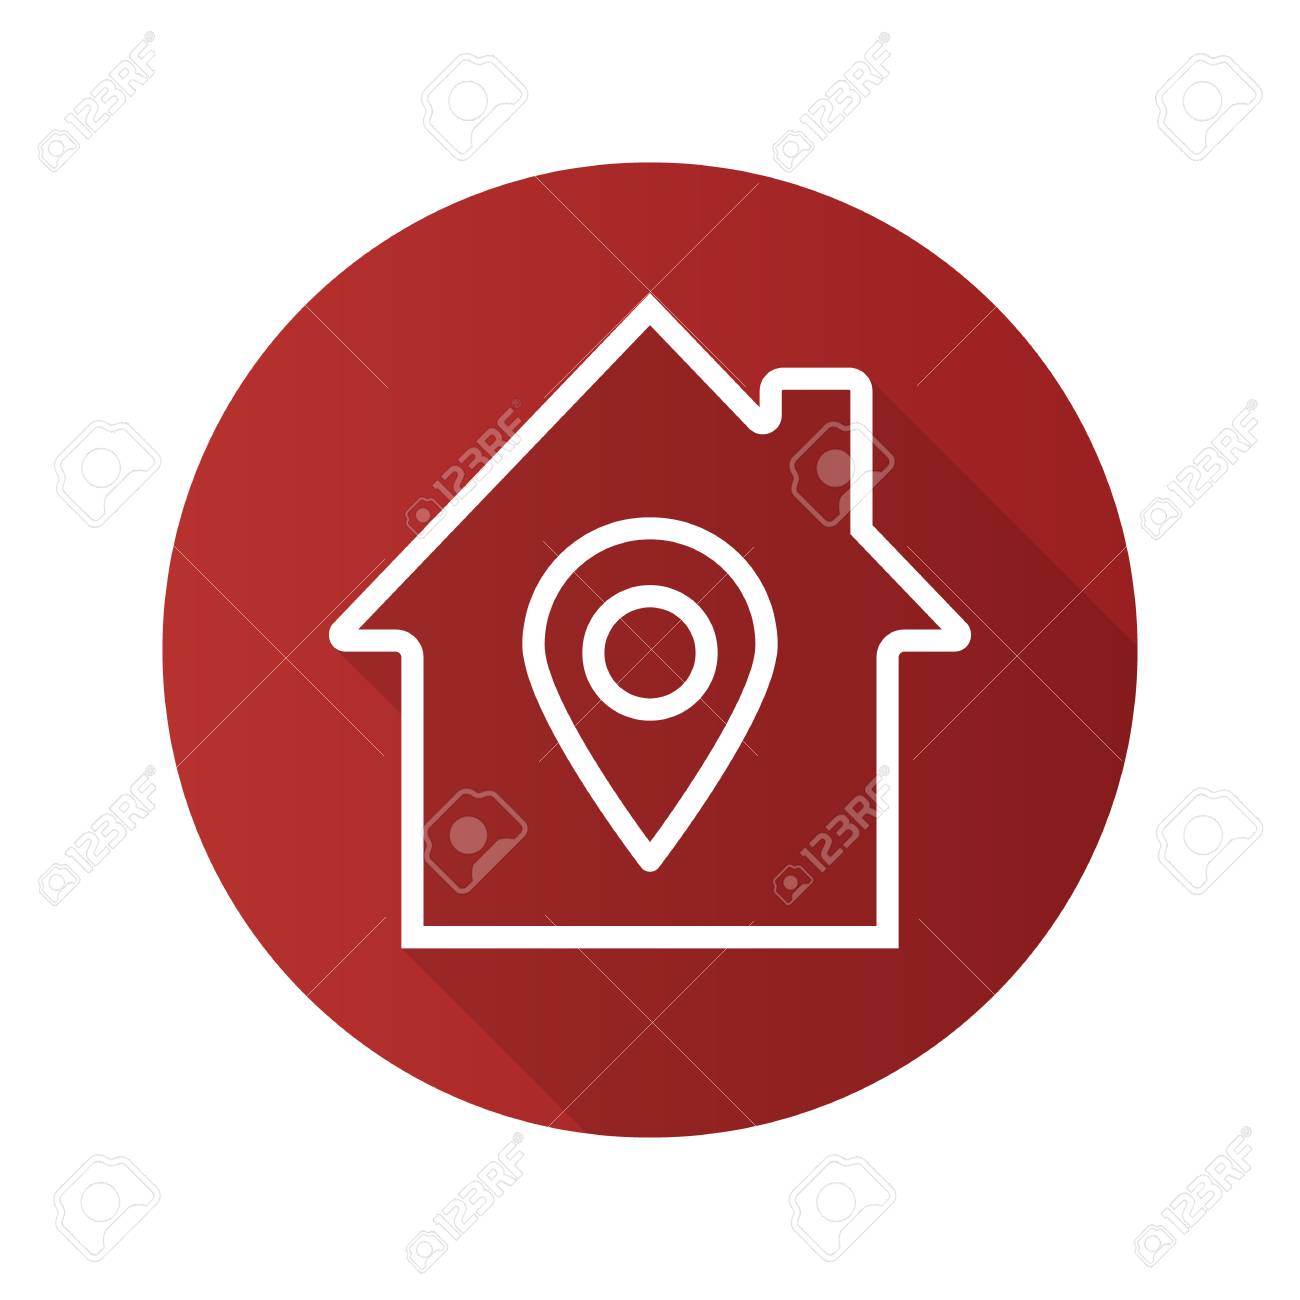 Pinpoint icon. Drop shadow geolocation mark silhouette symbol 